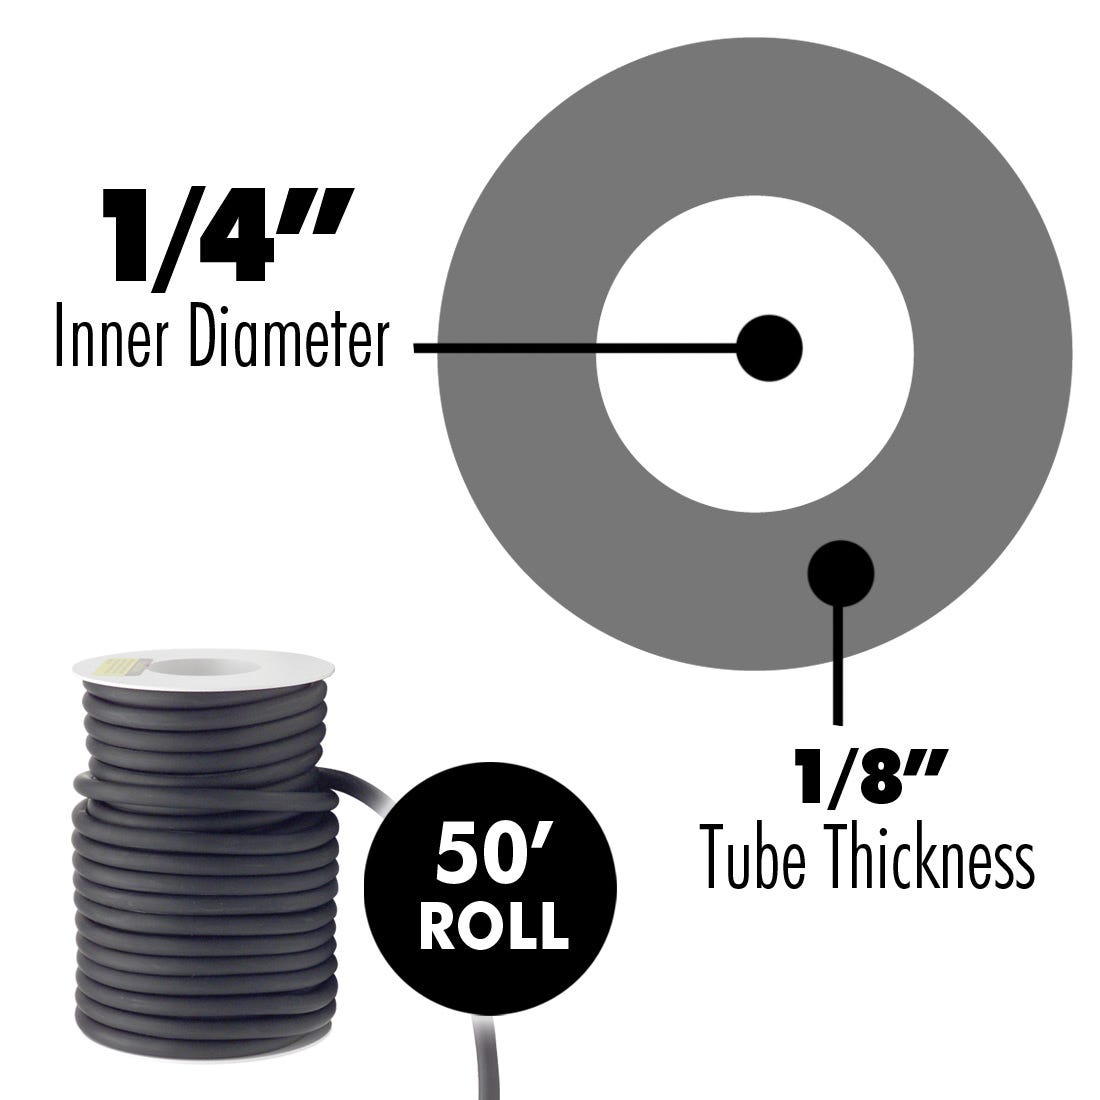 ACE Latex Rubber Tubing Black, 1/4" x 1/8"- 50' Roll